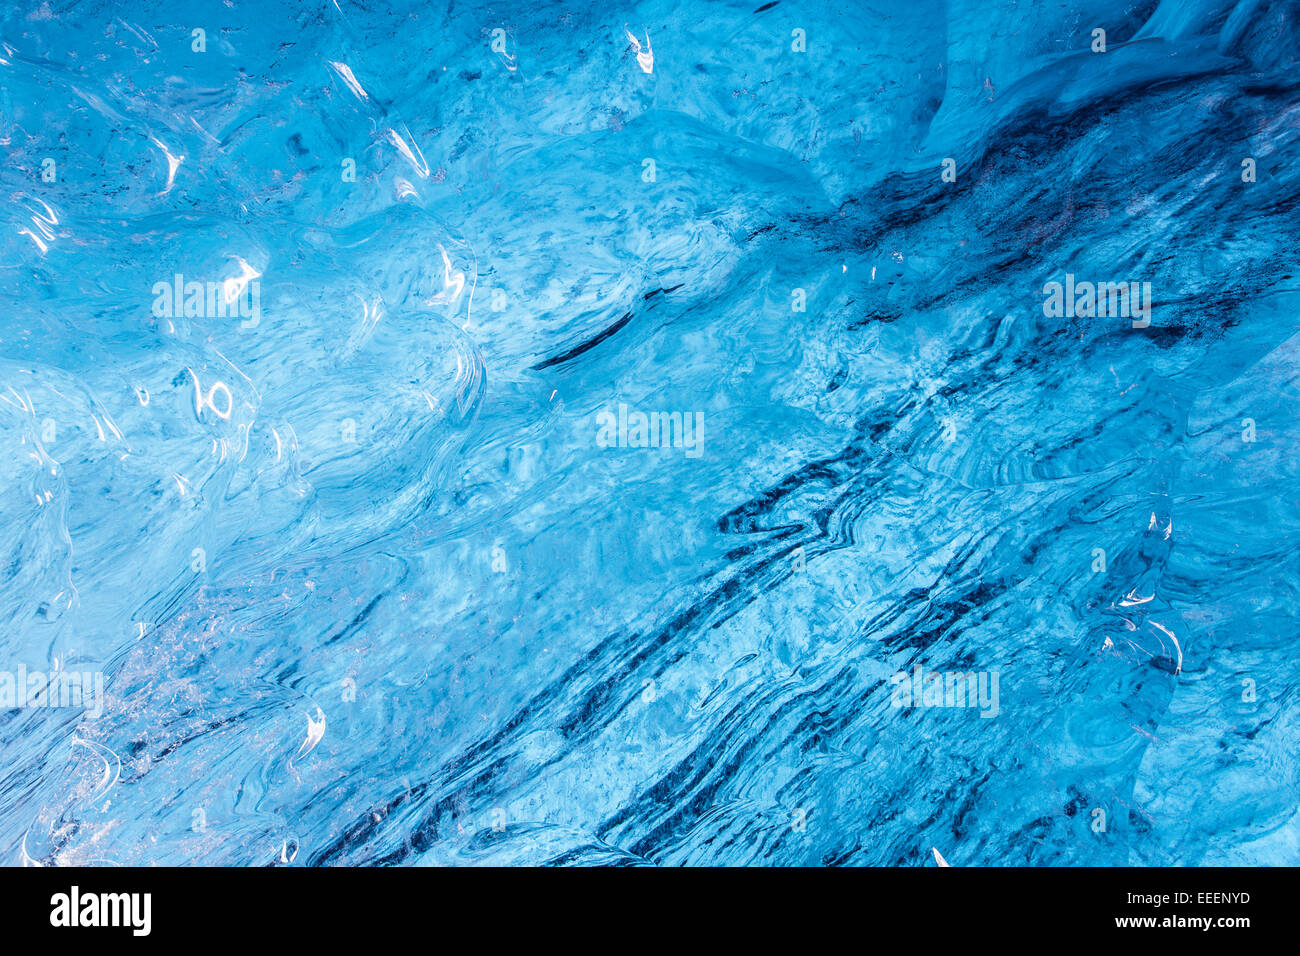 Frozen surface background with ice pattern Stock Photo